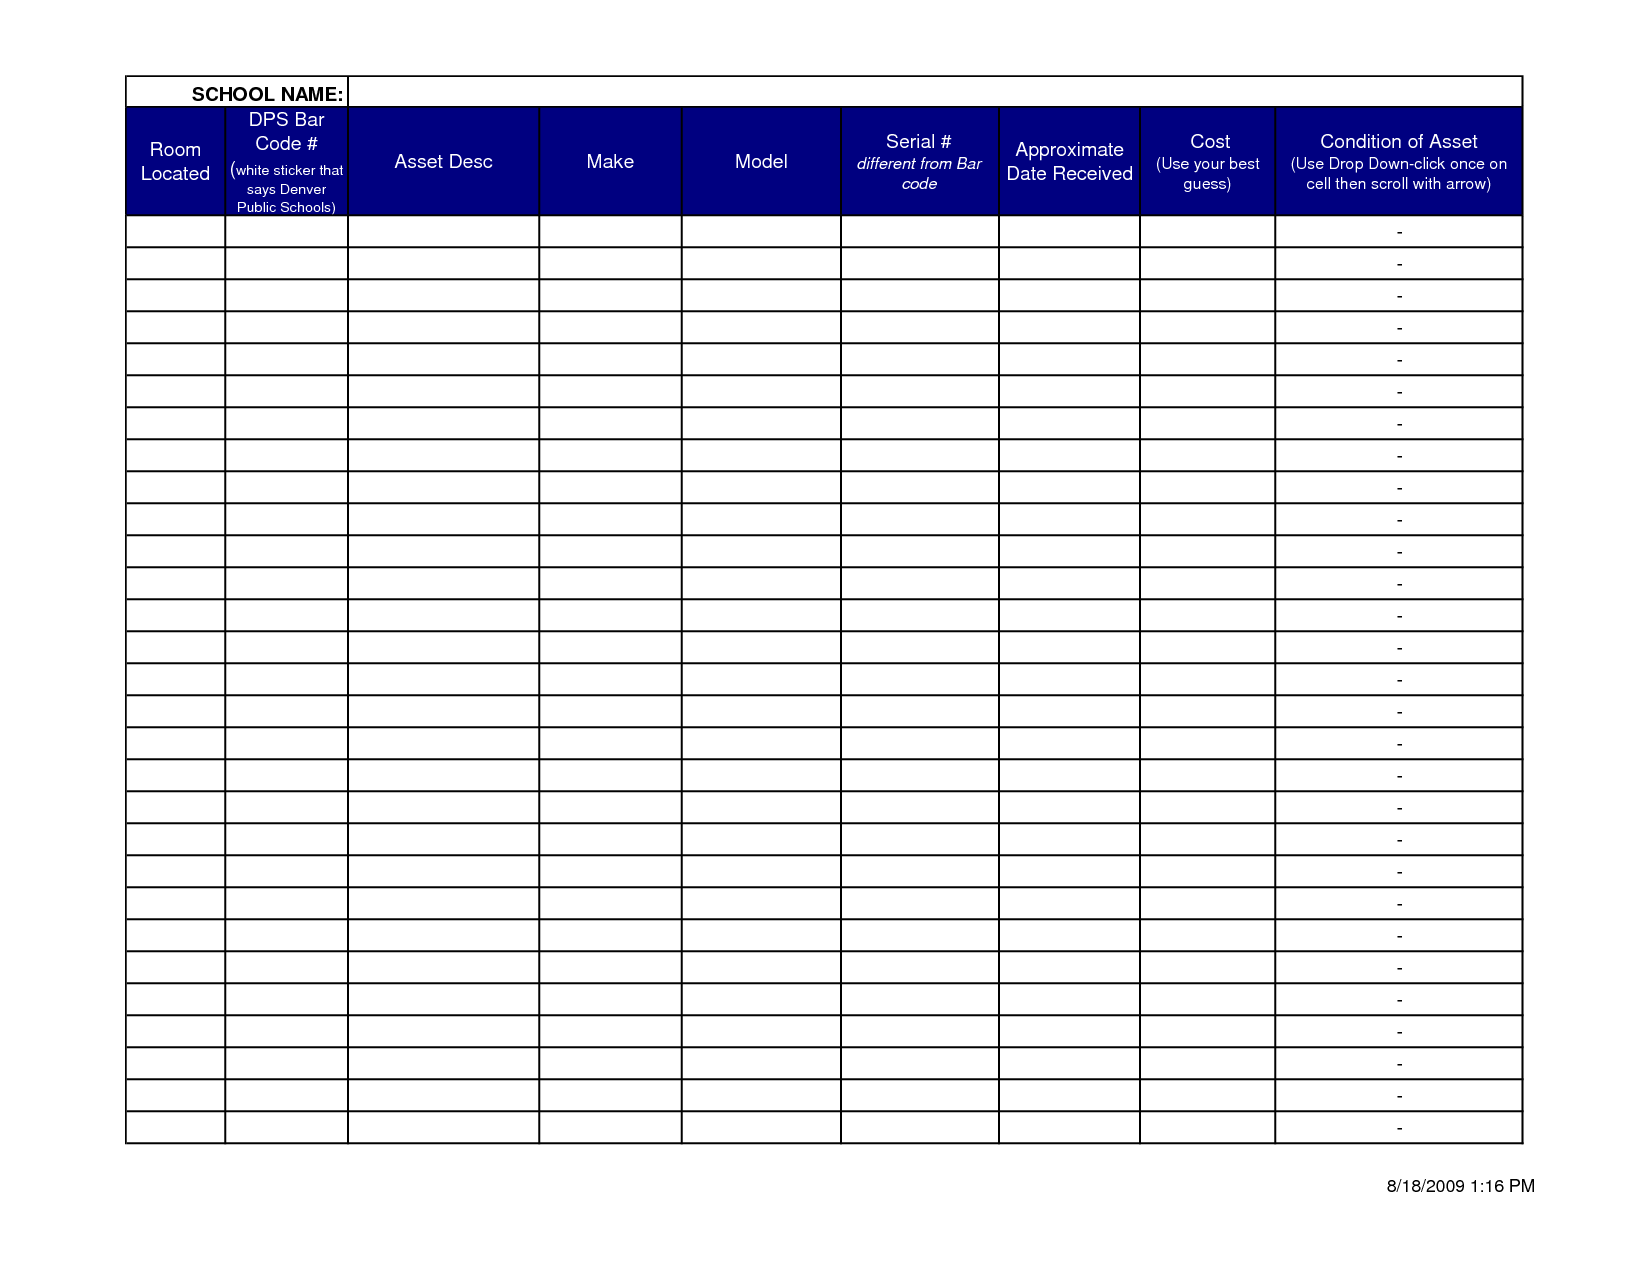 business travel expense report template